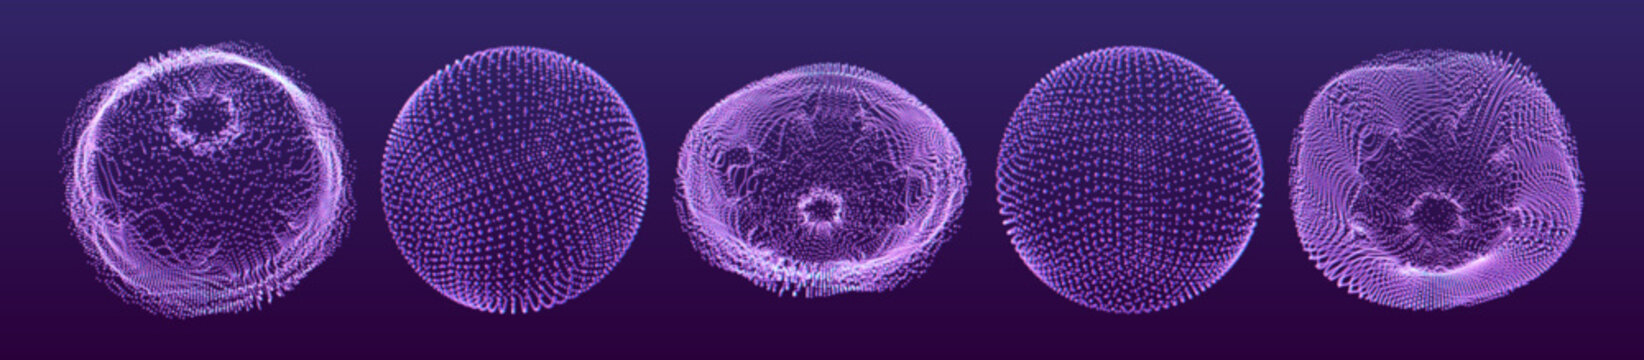 Spheres consisting of points. Global digital connections. Technology concept. Array with dynamic particles. 3D grid design. Vector illustration for science and technology.